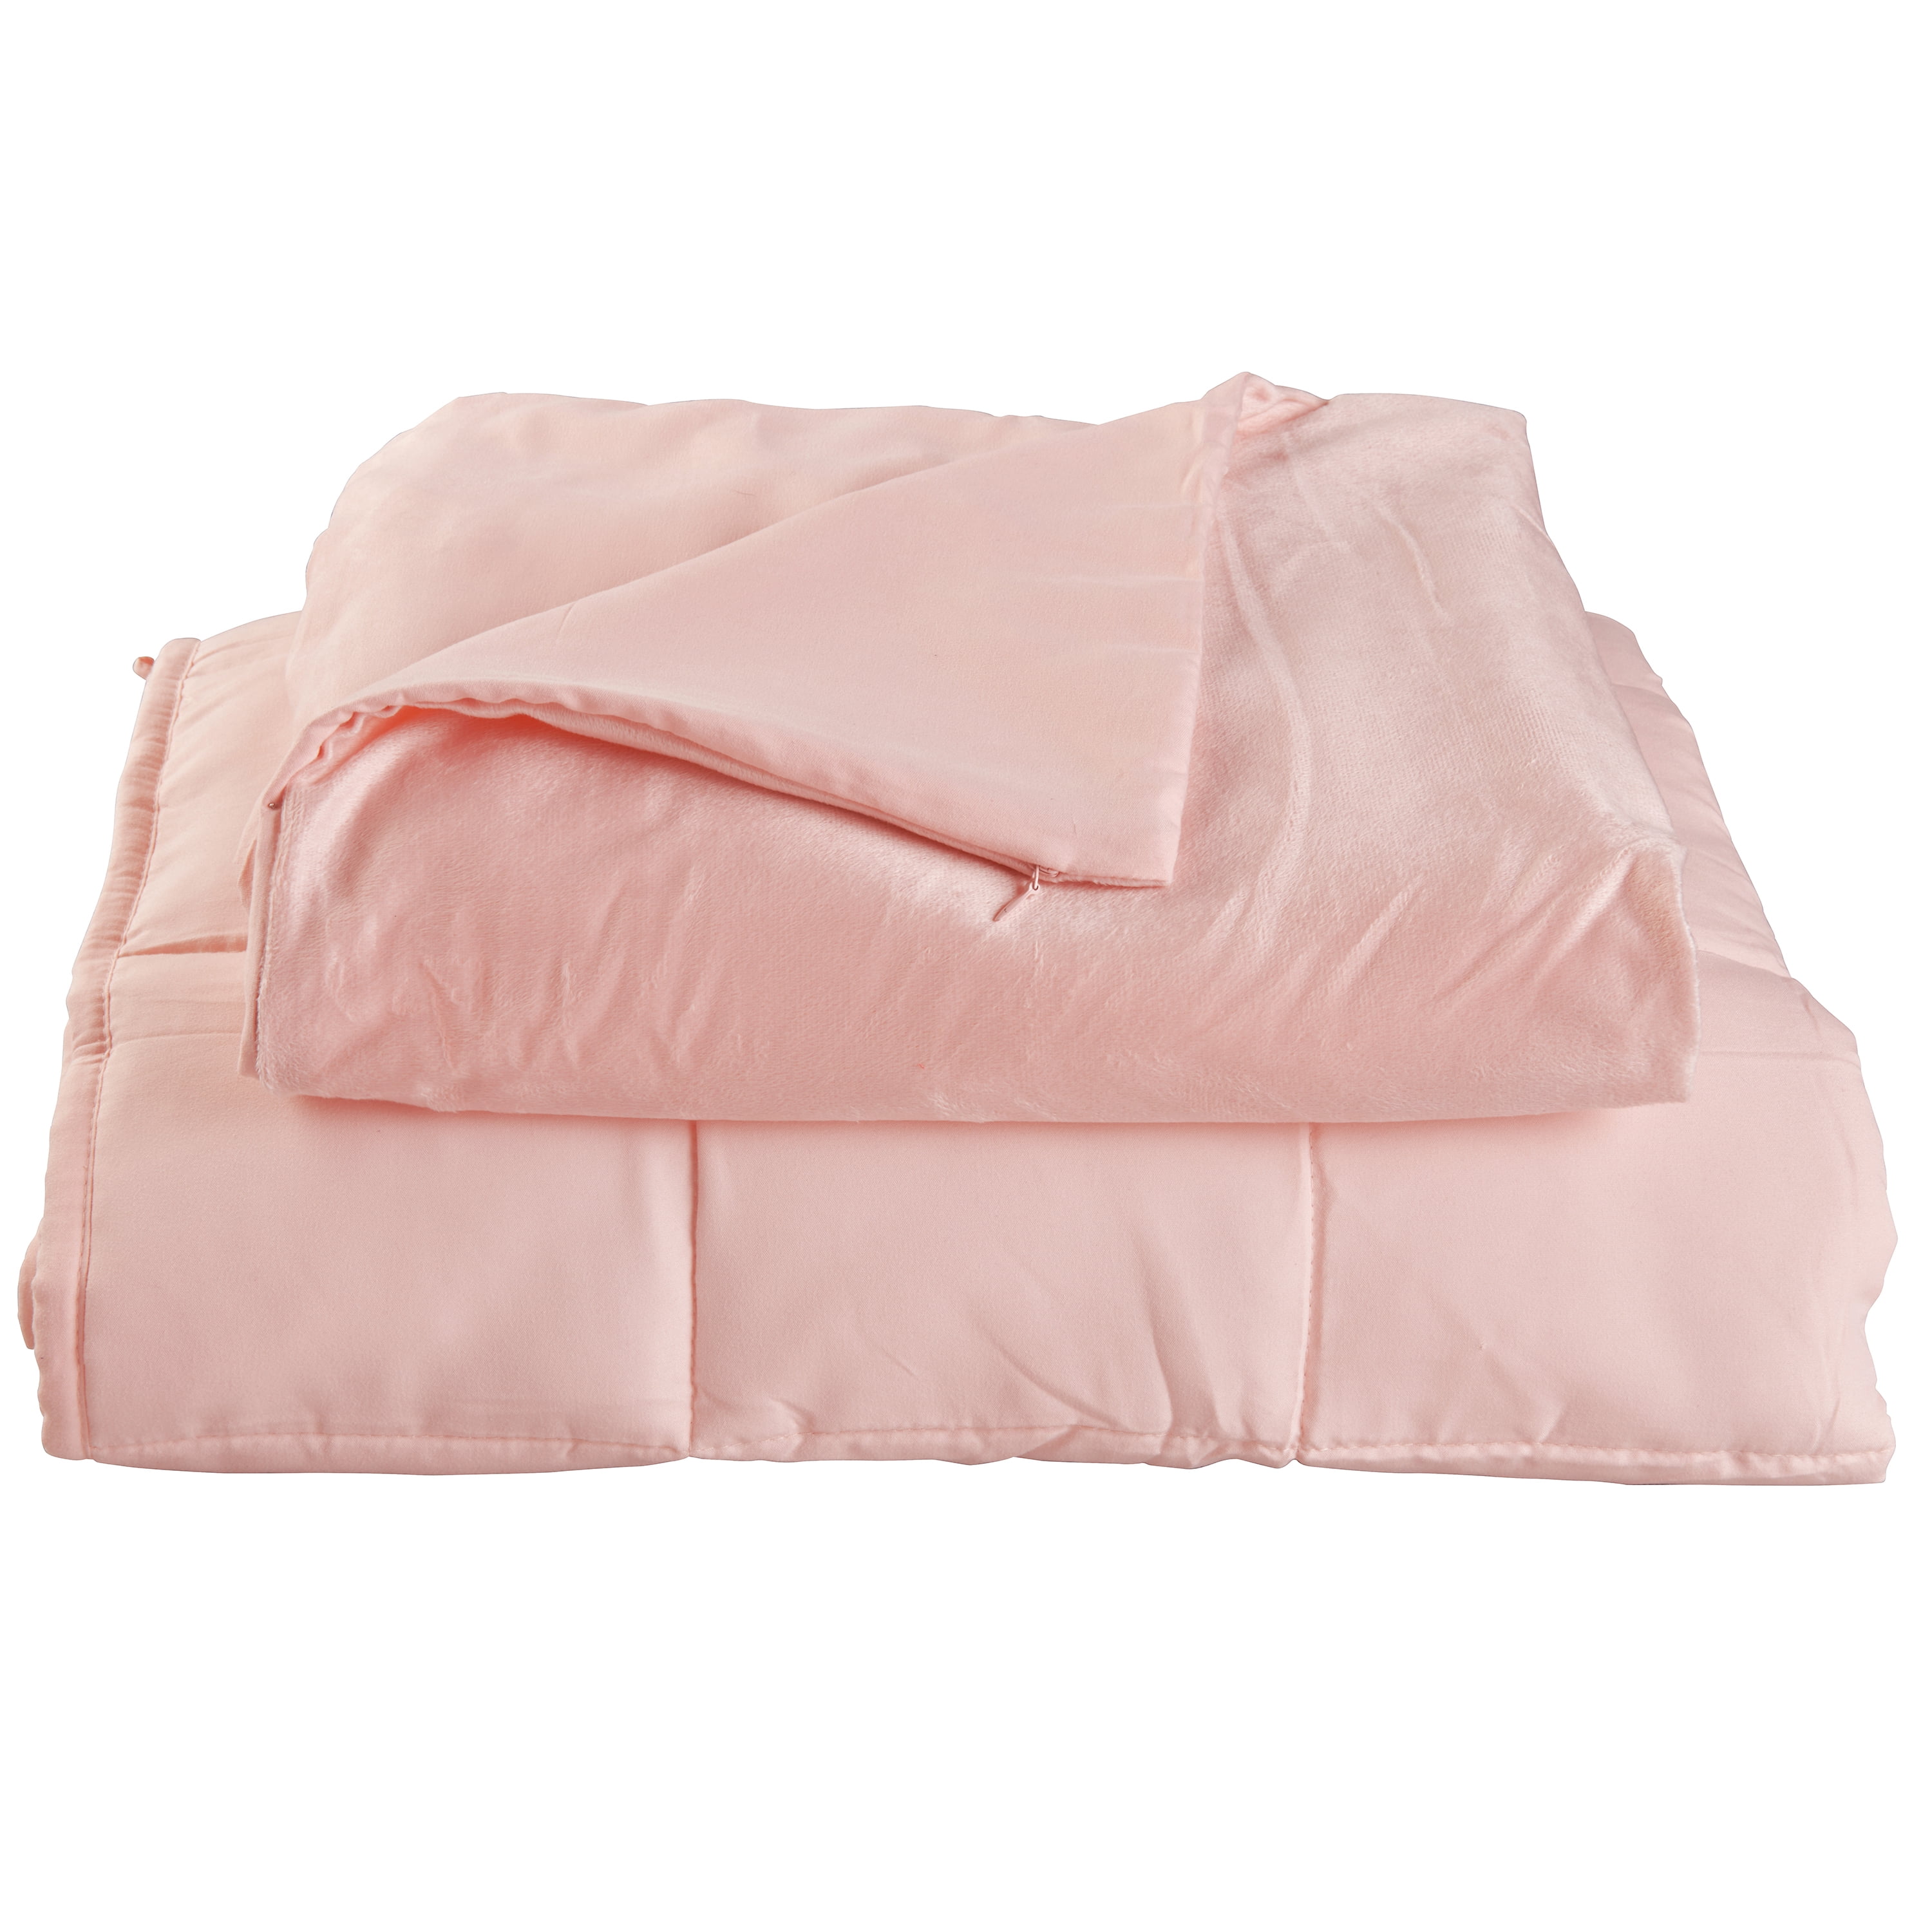 Tranquility Kid's Weighted Blanket, 6Lbs With Washable Cover, Pink